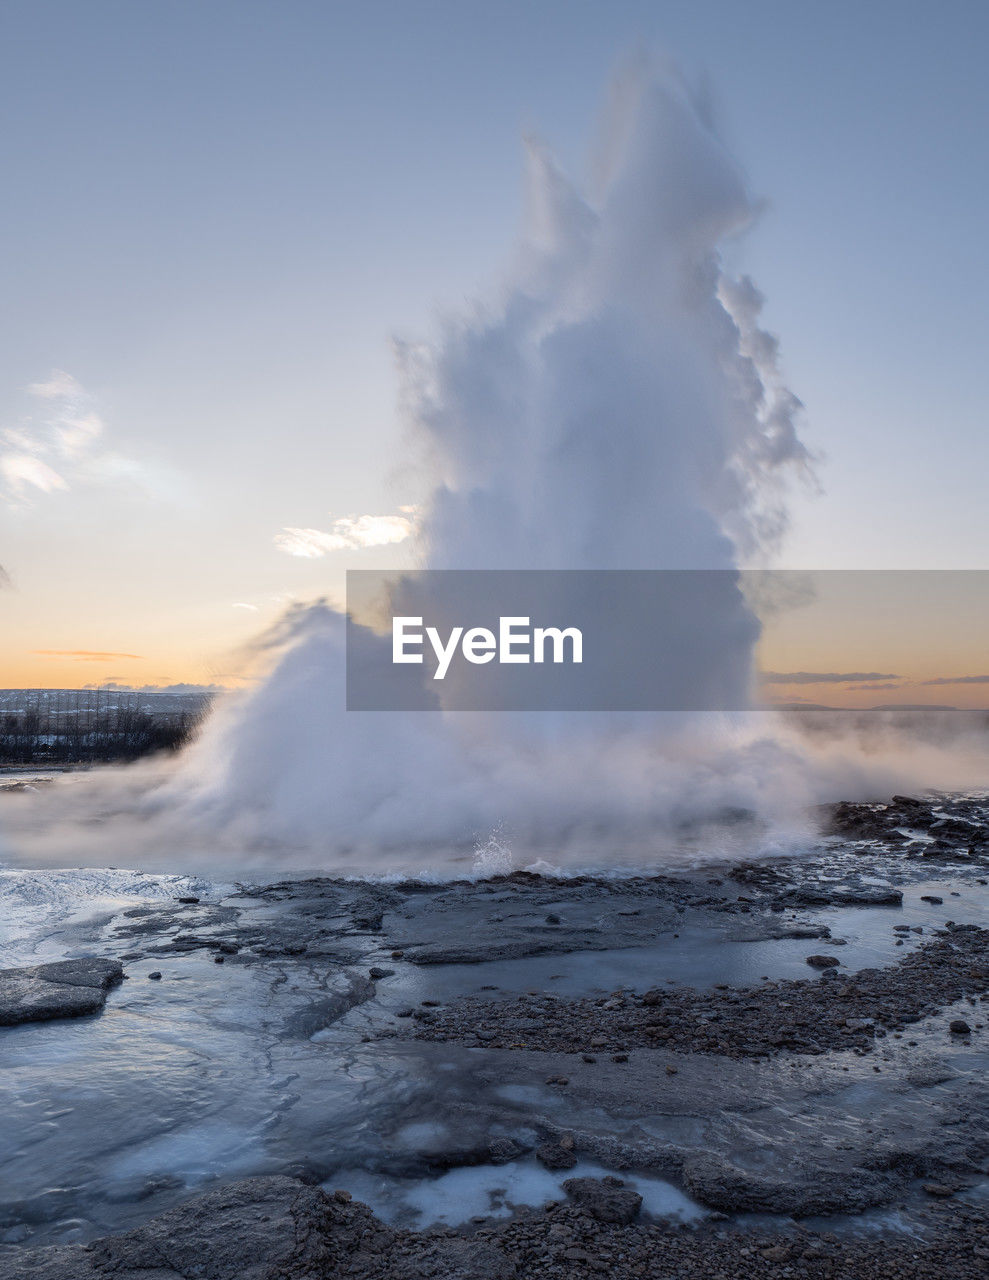 geology, water, power in nature, body of water, beauty in nature, geyser, steam, environment, landscape, sky, heat, nature, physical geography, erupting, scenics - nature, wave, hot spring, motion, cloud, sea, no people, wind wave, travel destinations, volcano, travel, non-urban scene, smoke, outdoors, natural phenomenon, volcanic landscape, land, accidents and disasters, morning, mountain, tourism, day, blowhole, dramatic landscape